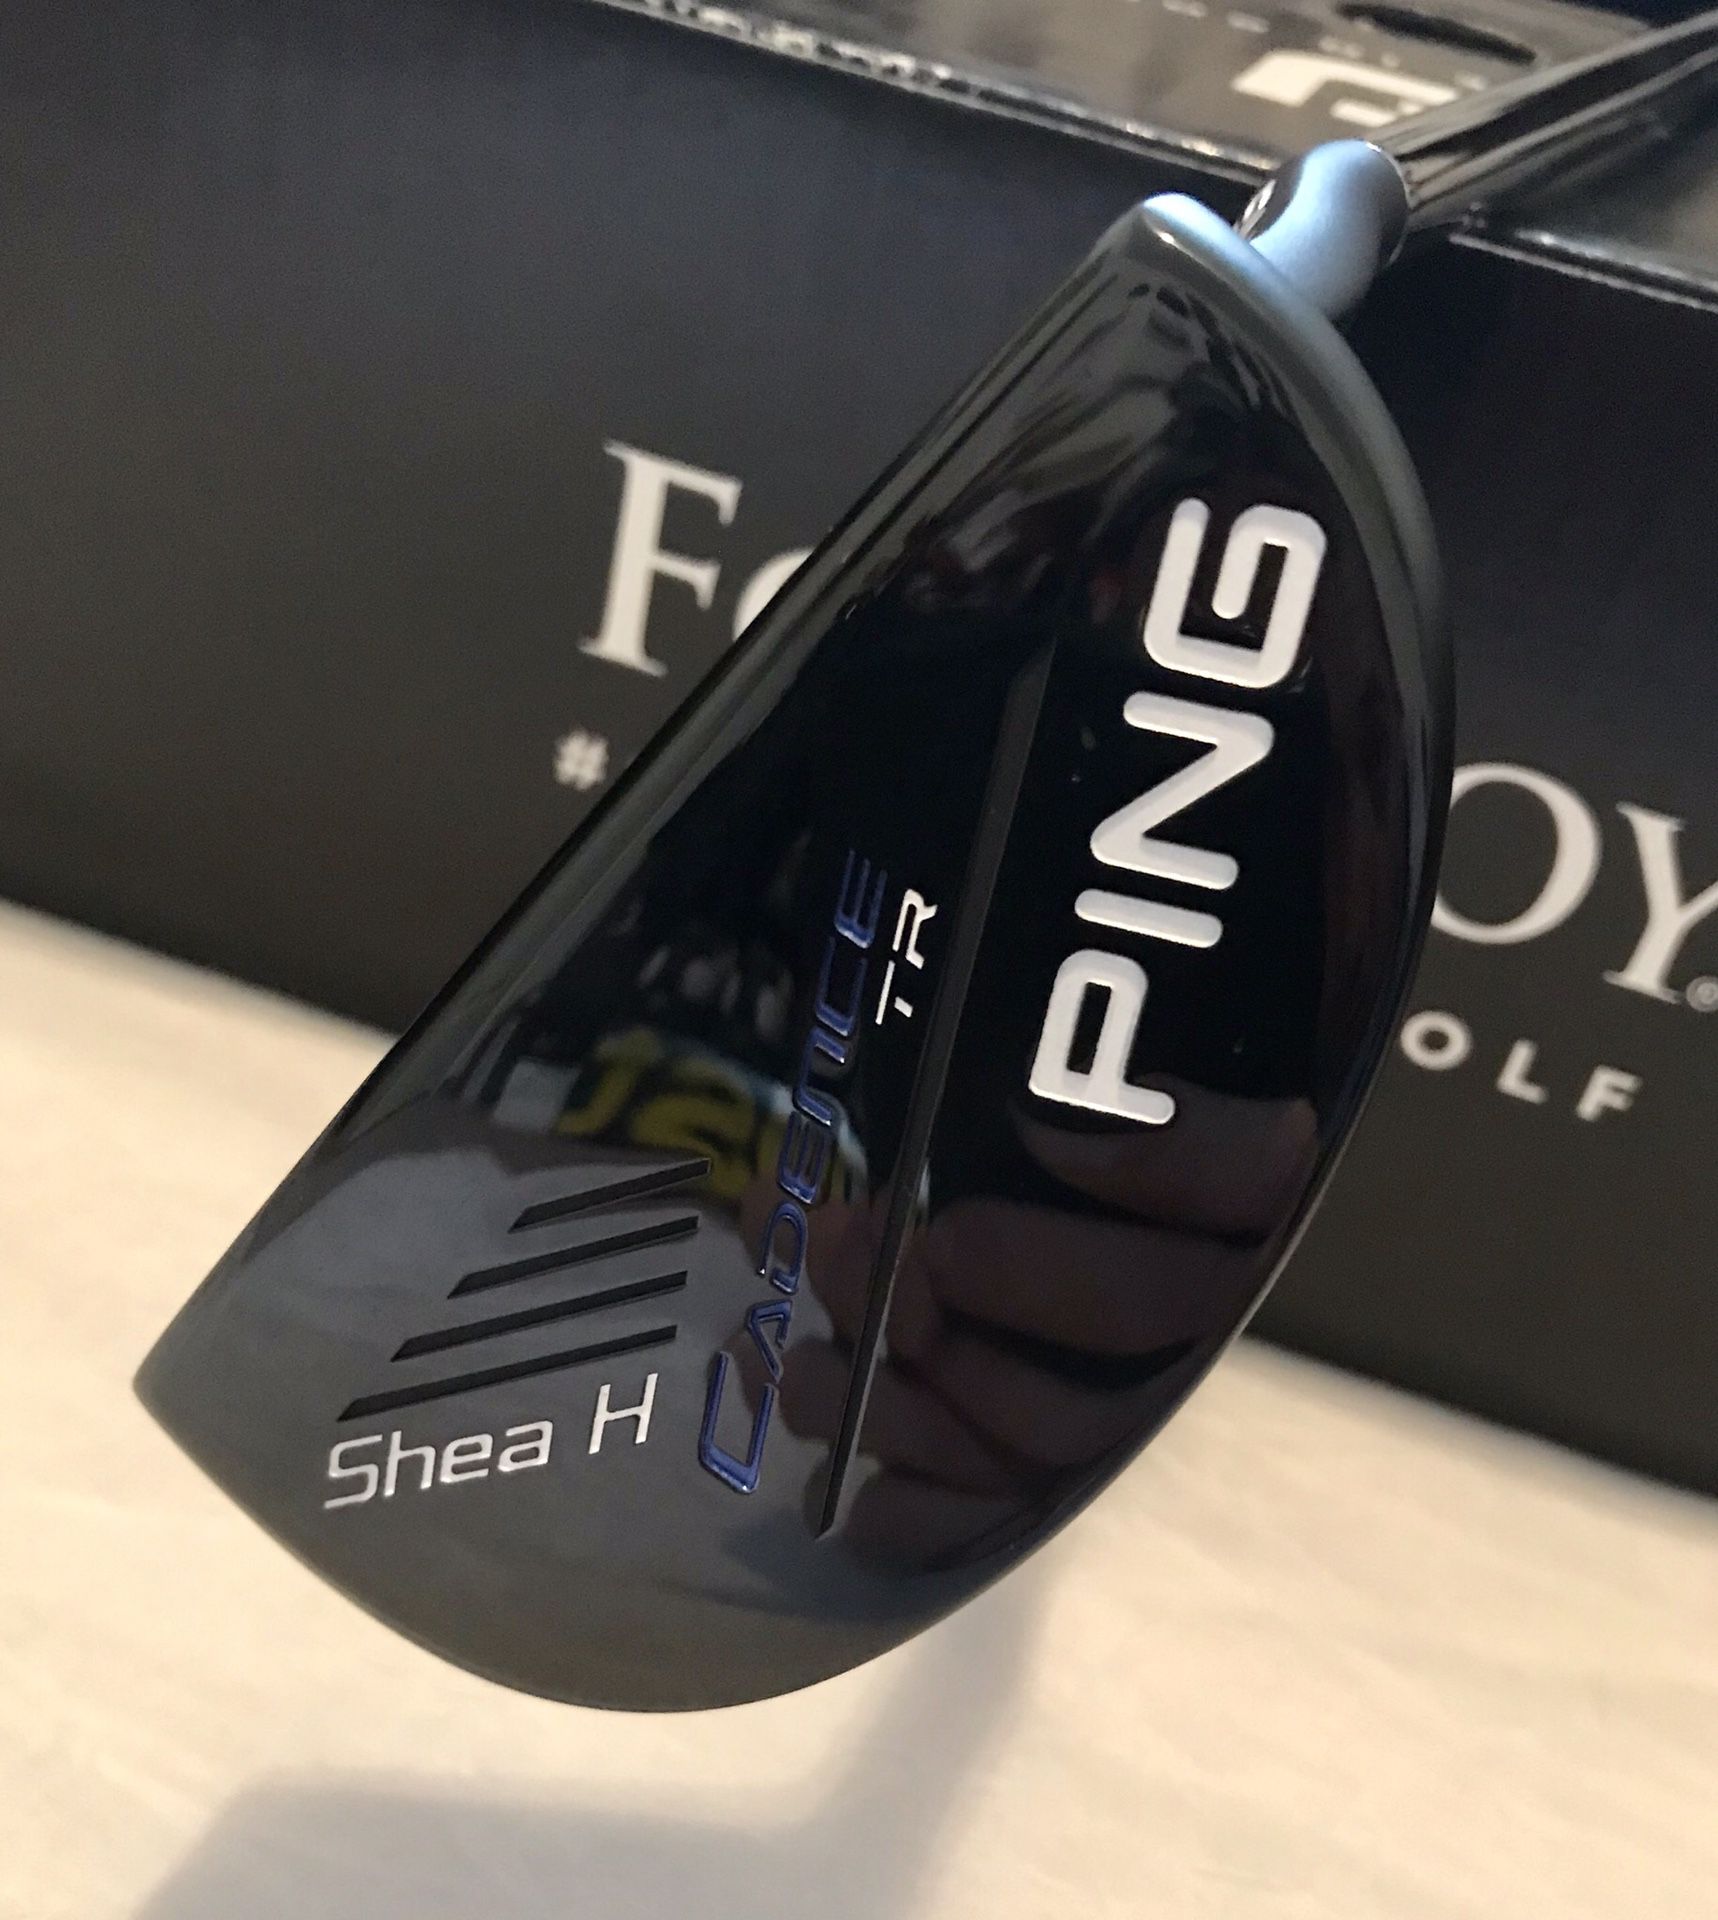 Ping Odyssey Works Cadence TR Shea H Putter